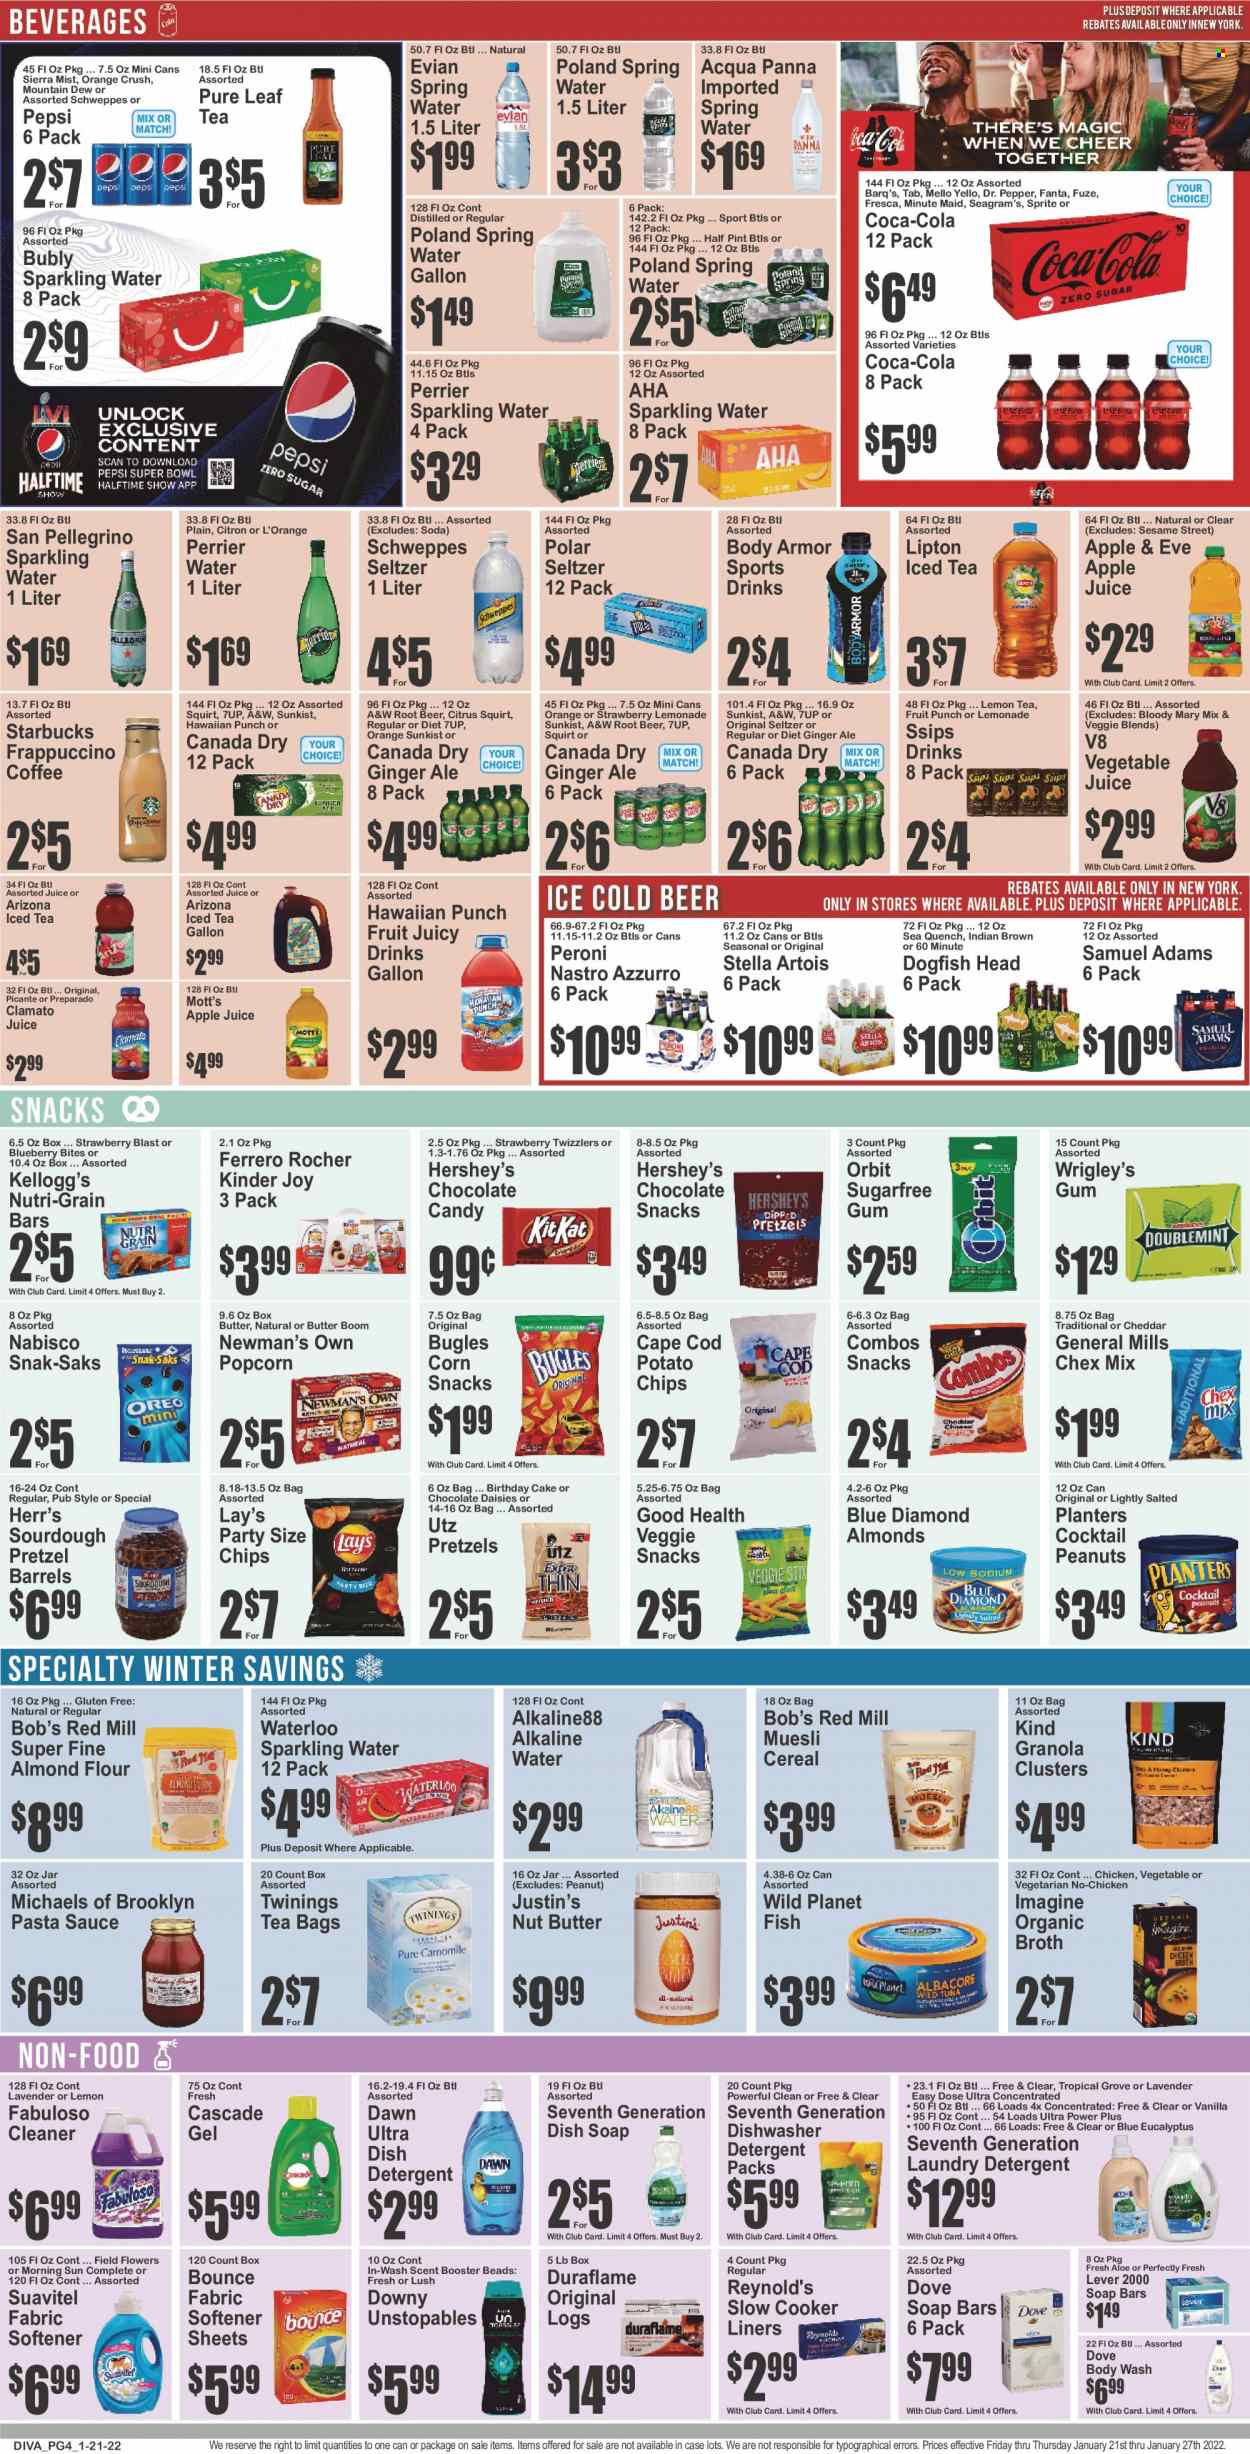 thumbnail - Key Food Flyer - 01/21/2022 - 01/27/2022 - Sales products - pretzels, cake, oranges, Mott's, cod, fish, pasta sauce, sauce, cheese, Hershey's, snack, Orbit, Ferrero Rocher, Kinder Joy, Kellogg's, chocolate candies, Sesame Street, potato chips, chips, Lay’s, popcorn, Chex Mix, flour, broth, almond flour, cereals, granola, muesli, Nutri-Grain, nut butter, peanuts, Planters, Blue Diamond, apple juice, Canada Dry, Coca-Cola, ginger ale, lemonade, Mountain Dew, Schweppes, Sprite, Pepsi, juice, Fanta, Body Armor, Lipton, Dr. Pepper, Clamato, 7UP, AriZona, A&W, Sierra Mist, vegetable juice, Perrier, fruit punch, seltzer water, spring water, soda, sparkling water, alkaline water, Evian, San Pellegrino, tea bags, Twinings, Pure Leaf, coffee, Starbucks, frappuccino, beer, Peroni, Dove, detergent, cleaner, Fabuloso, Cascade, Unstopables, fabric softener, laundry detergent, Bounce, body wash, soap, Stella Artois. Page 4.